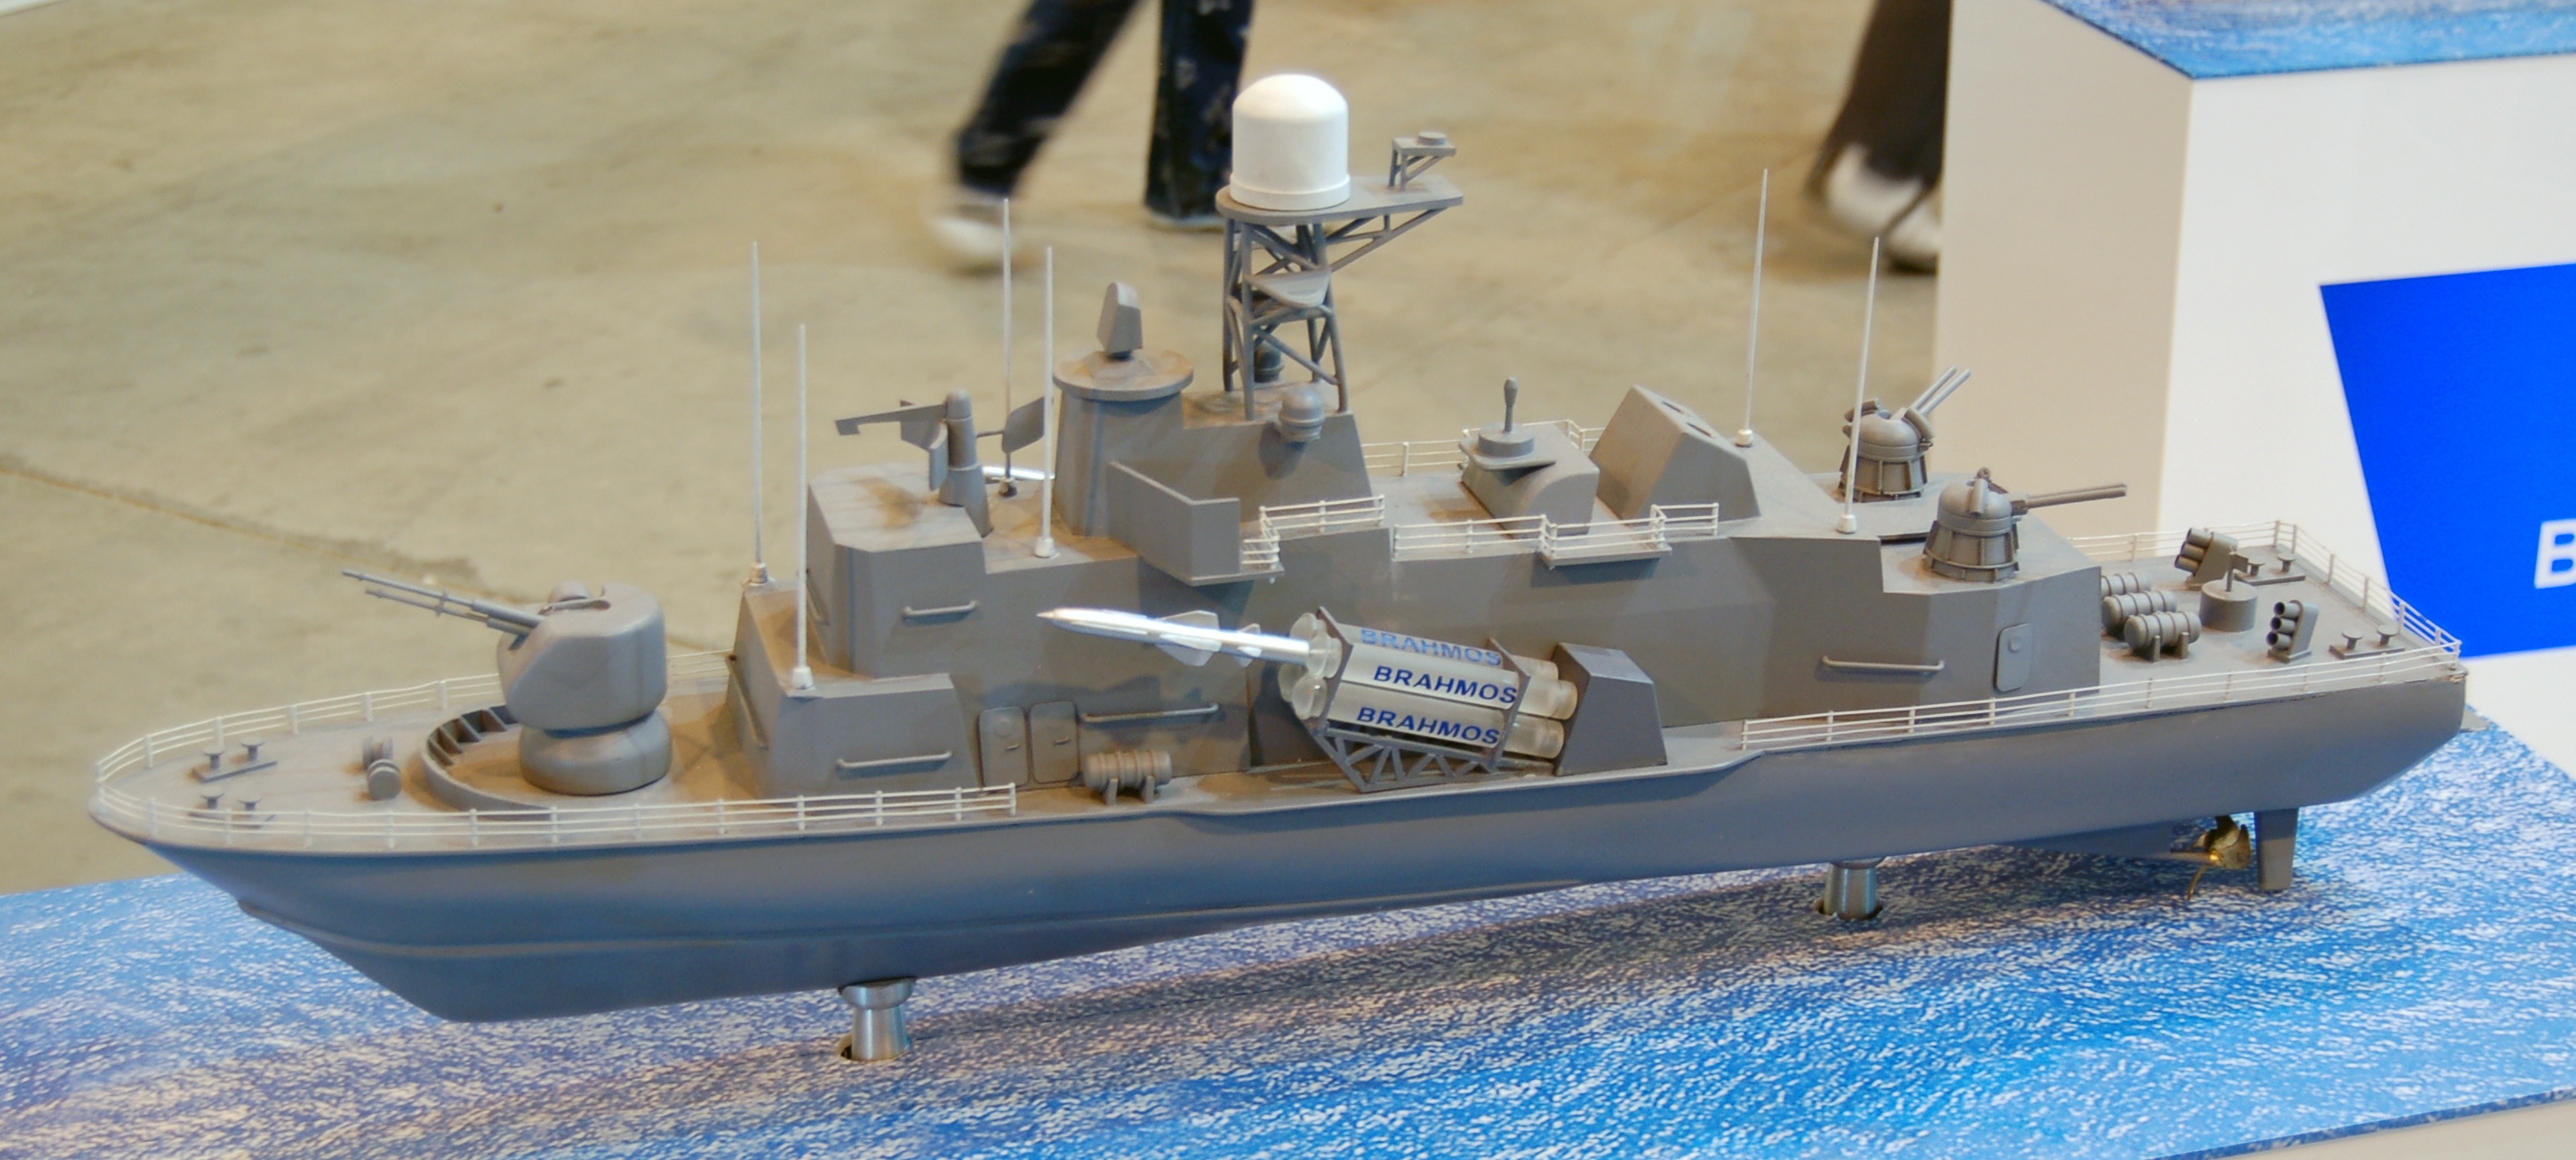 File:BrahMos missile boat maquette MAKS2009.jpg - Wikimedia Commons